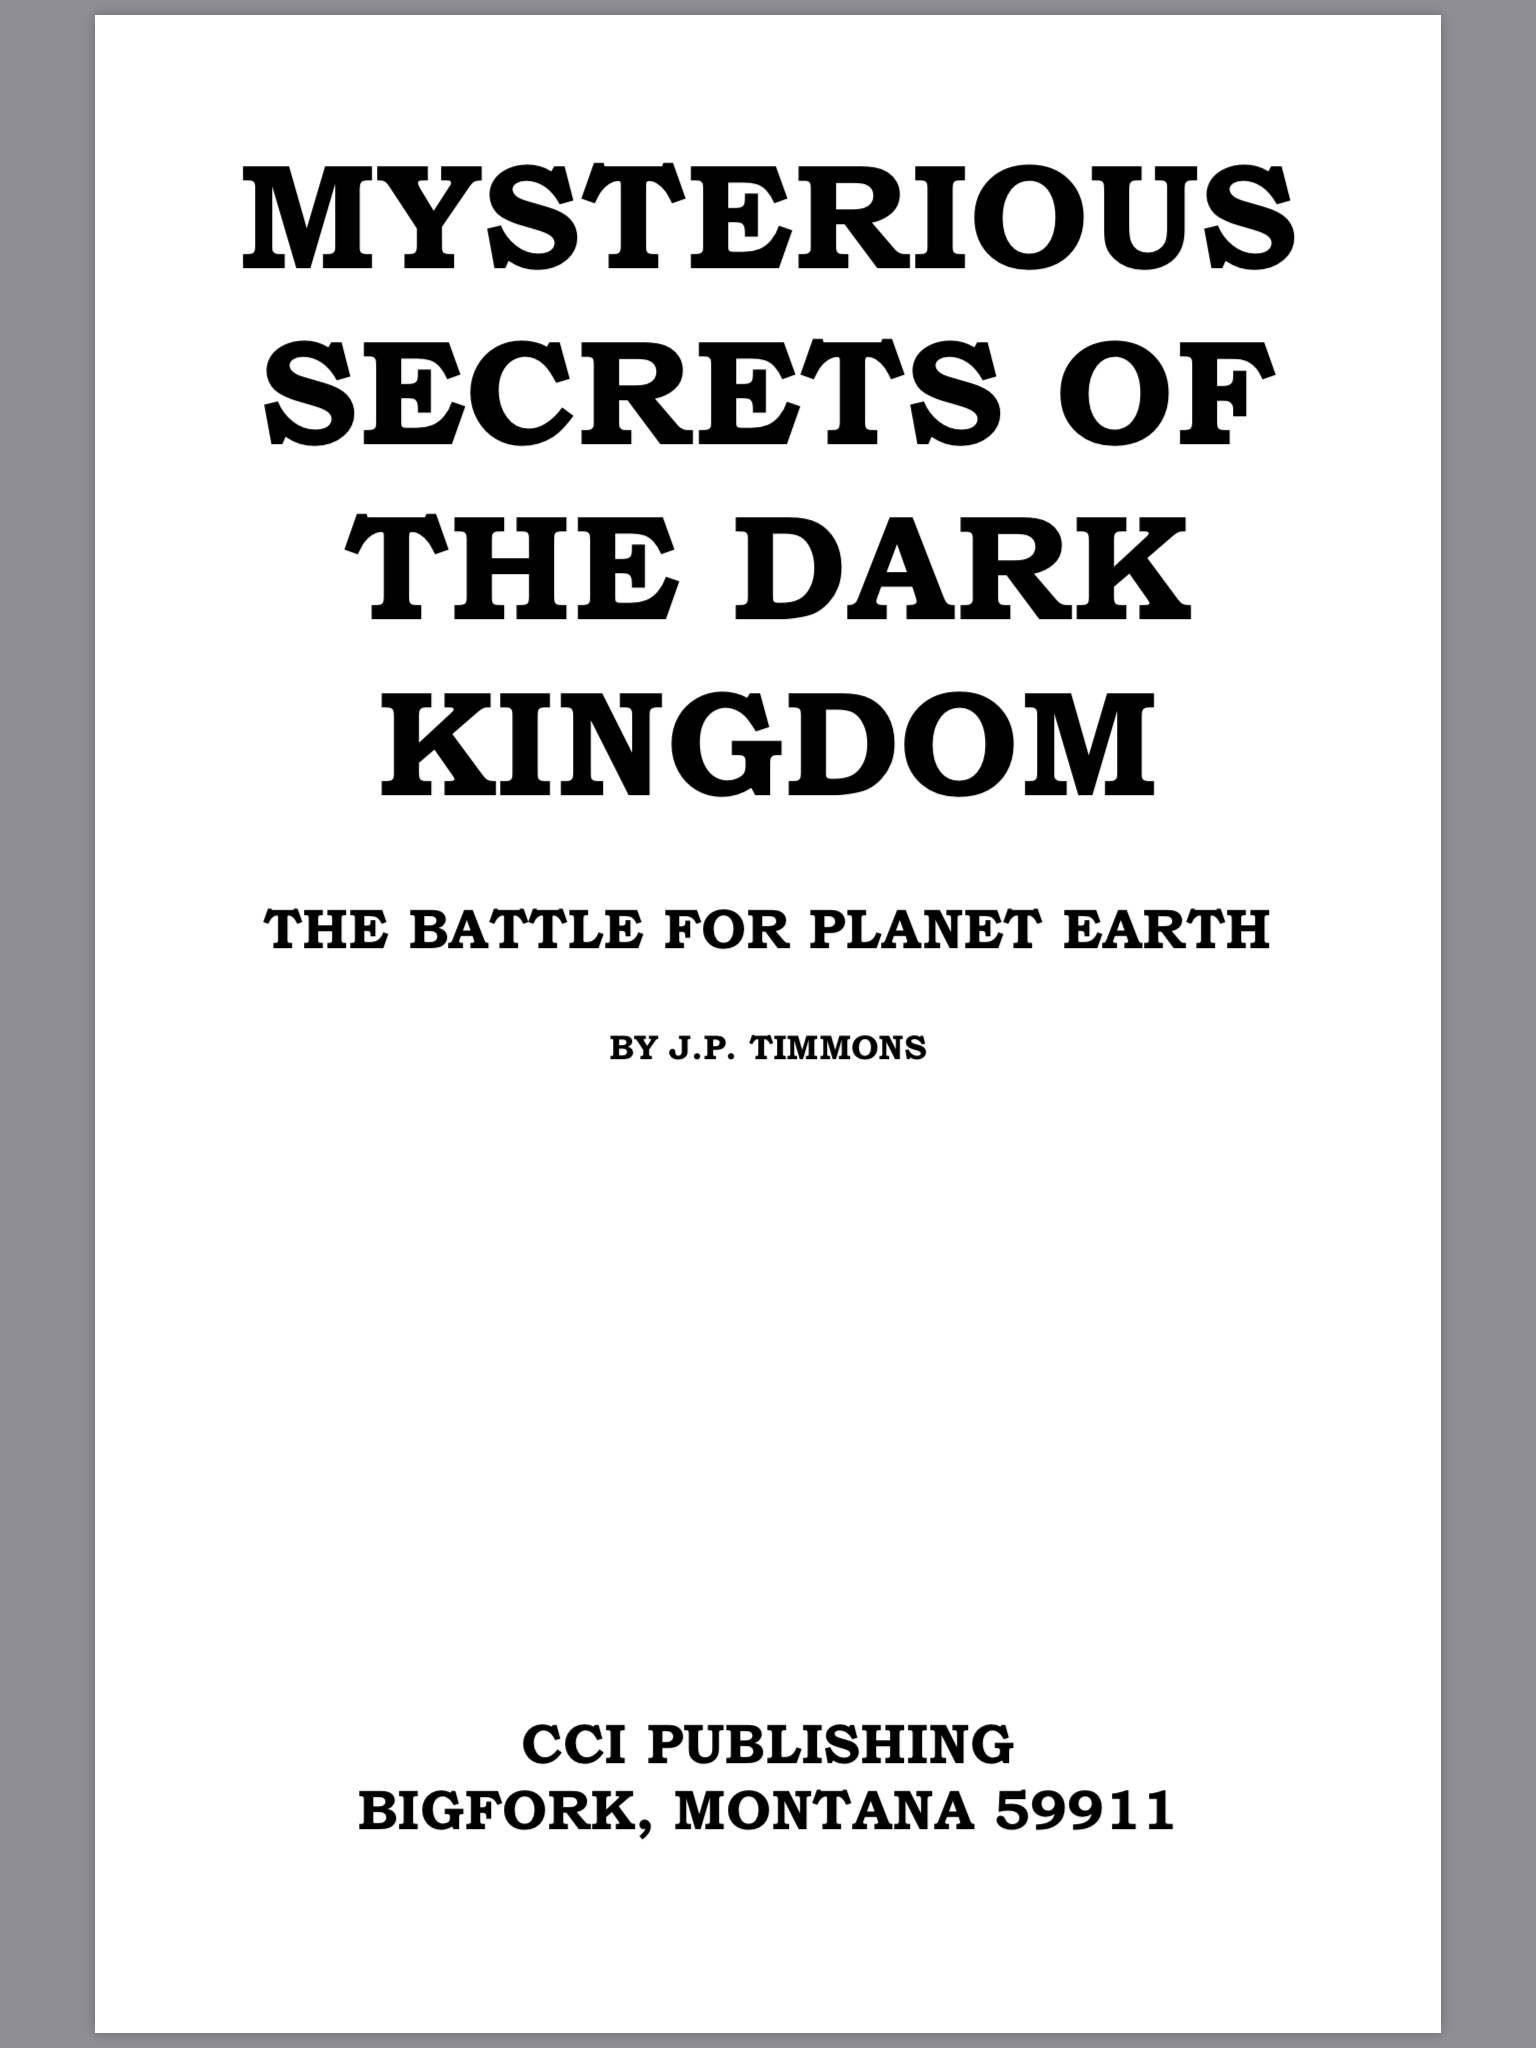 A book cover with the title of mysterious secrets of the dark kingdom.